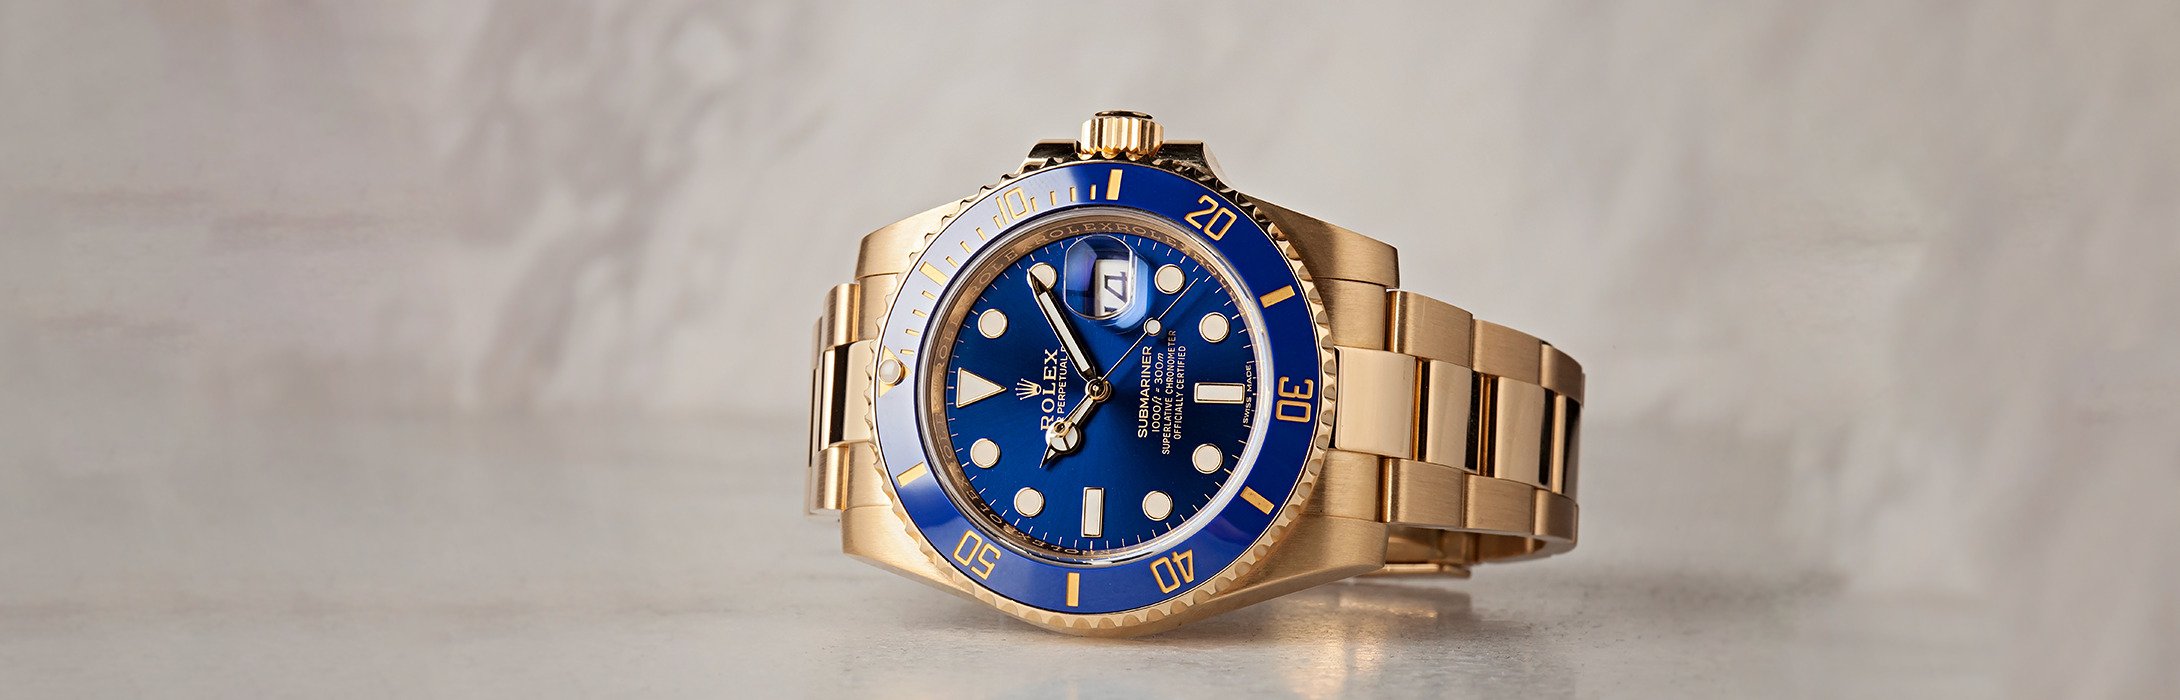 Blue Rolex Submariner Watches – Ultimate Review and Buying Guide